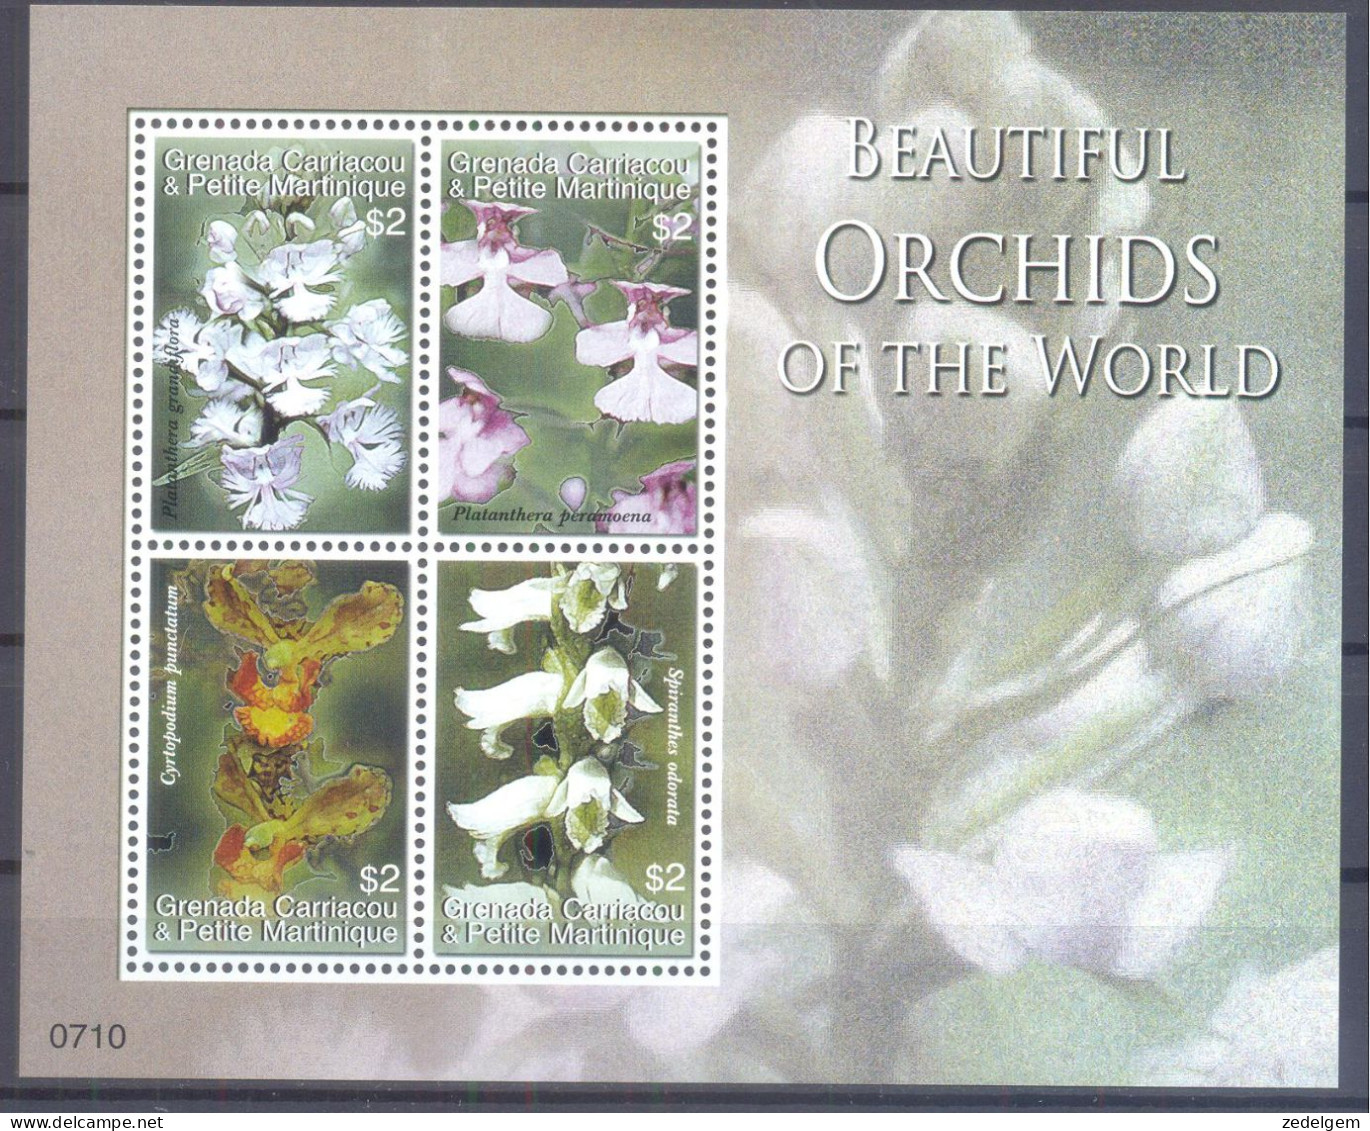 GRENADA CARRIACOU     ( ORC089) XC - Orchids